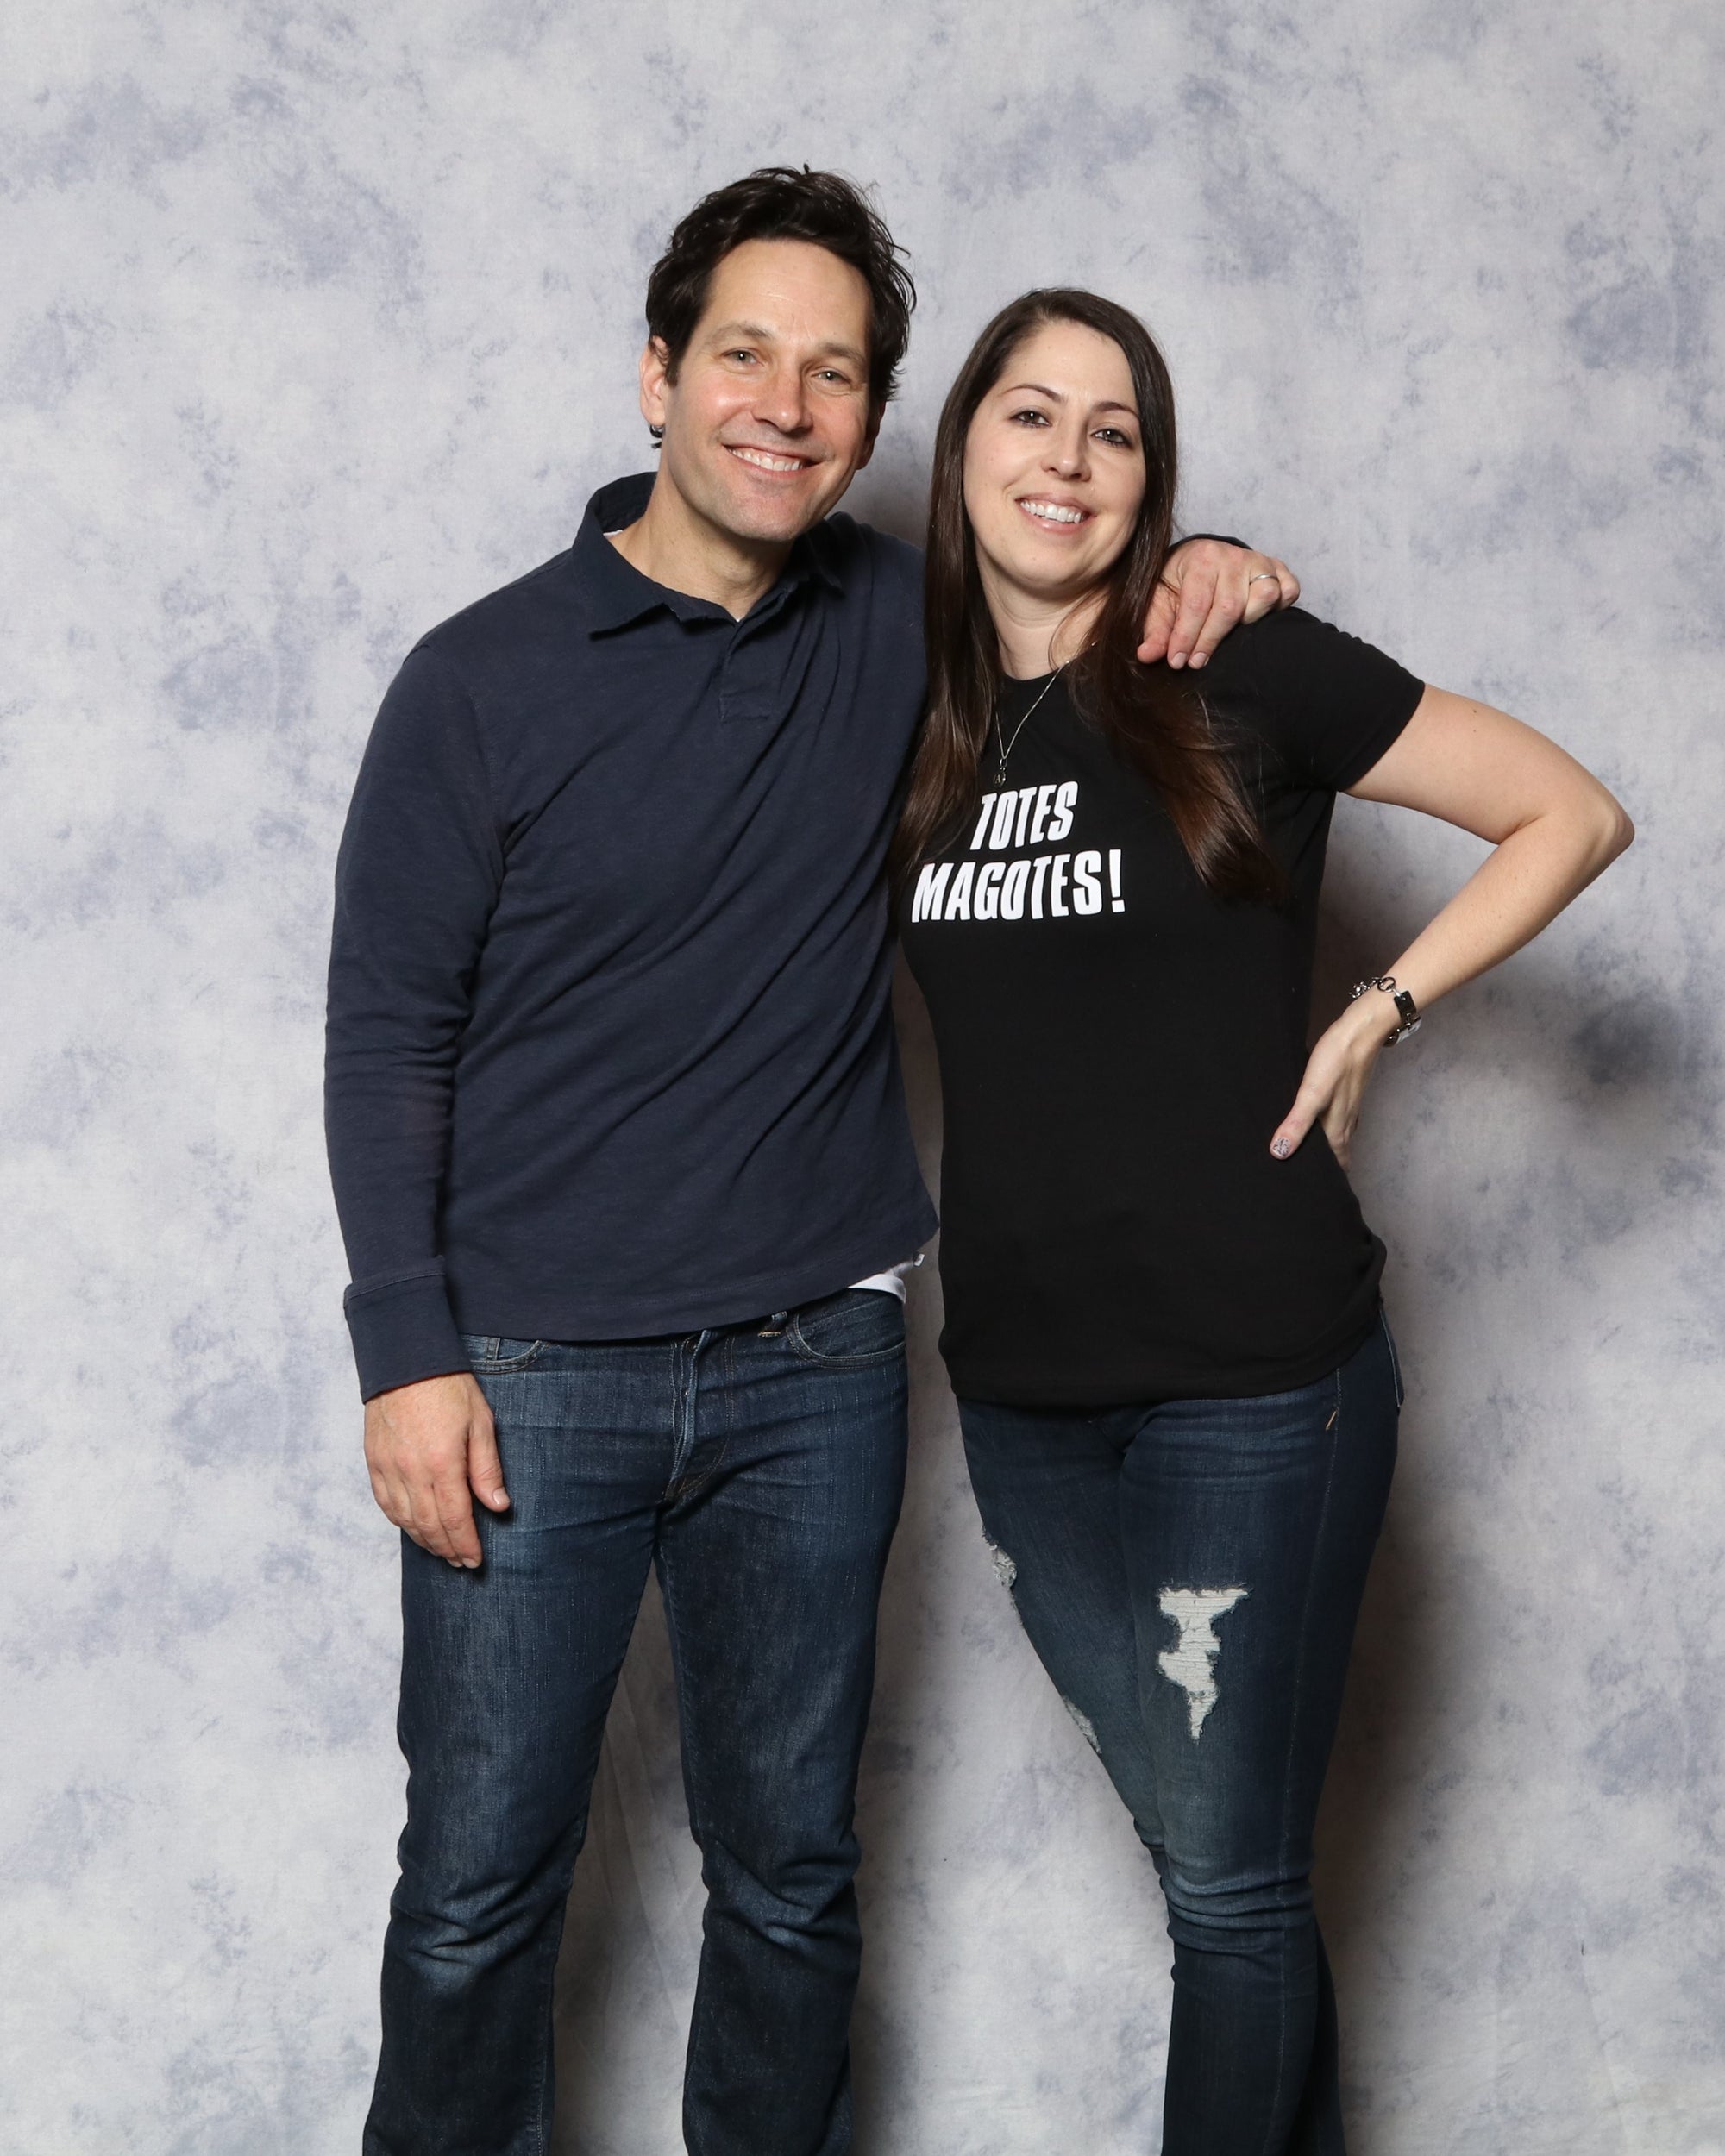 We had a great time at c2e2.  Met Paul Rudd.